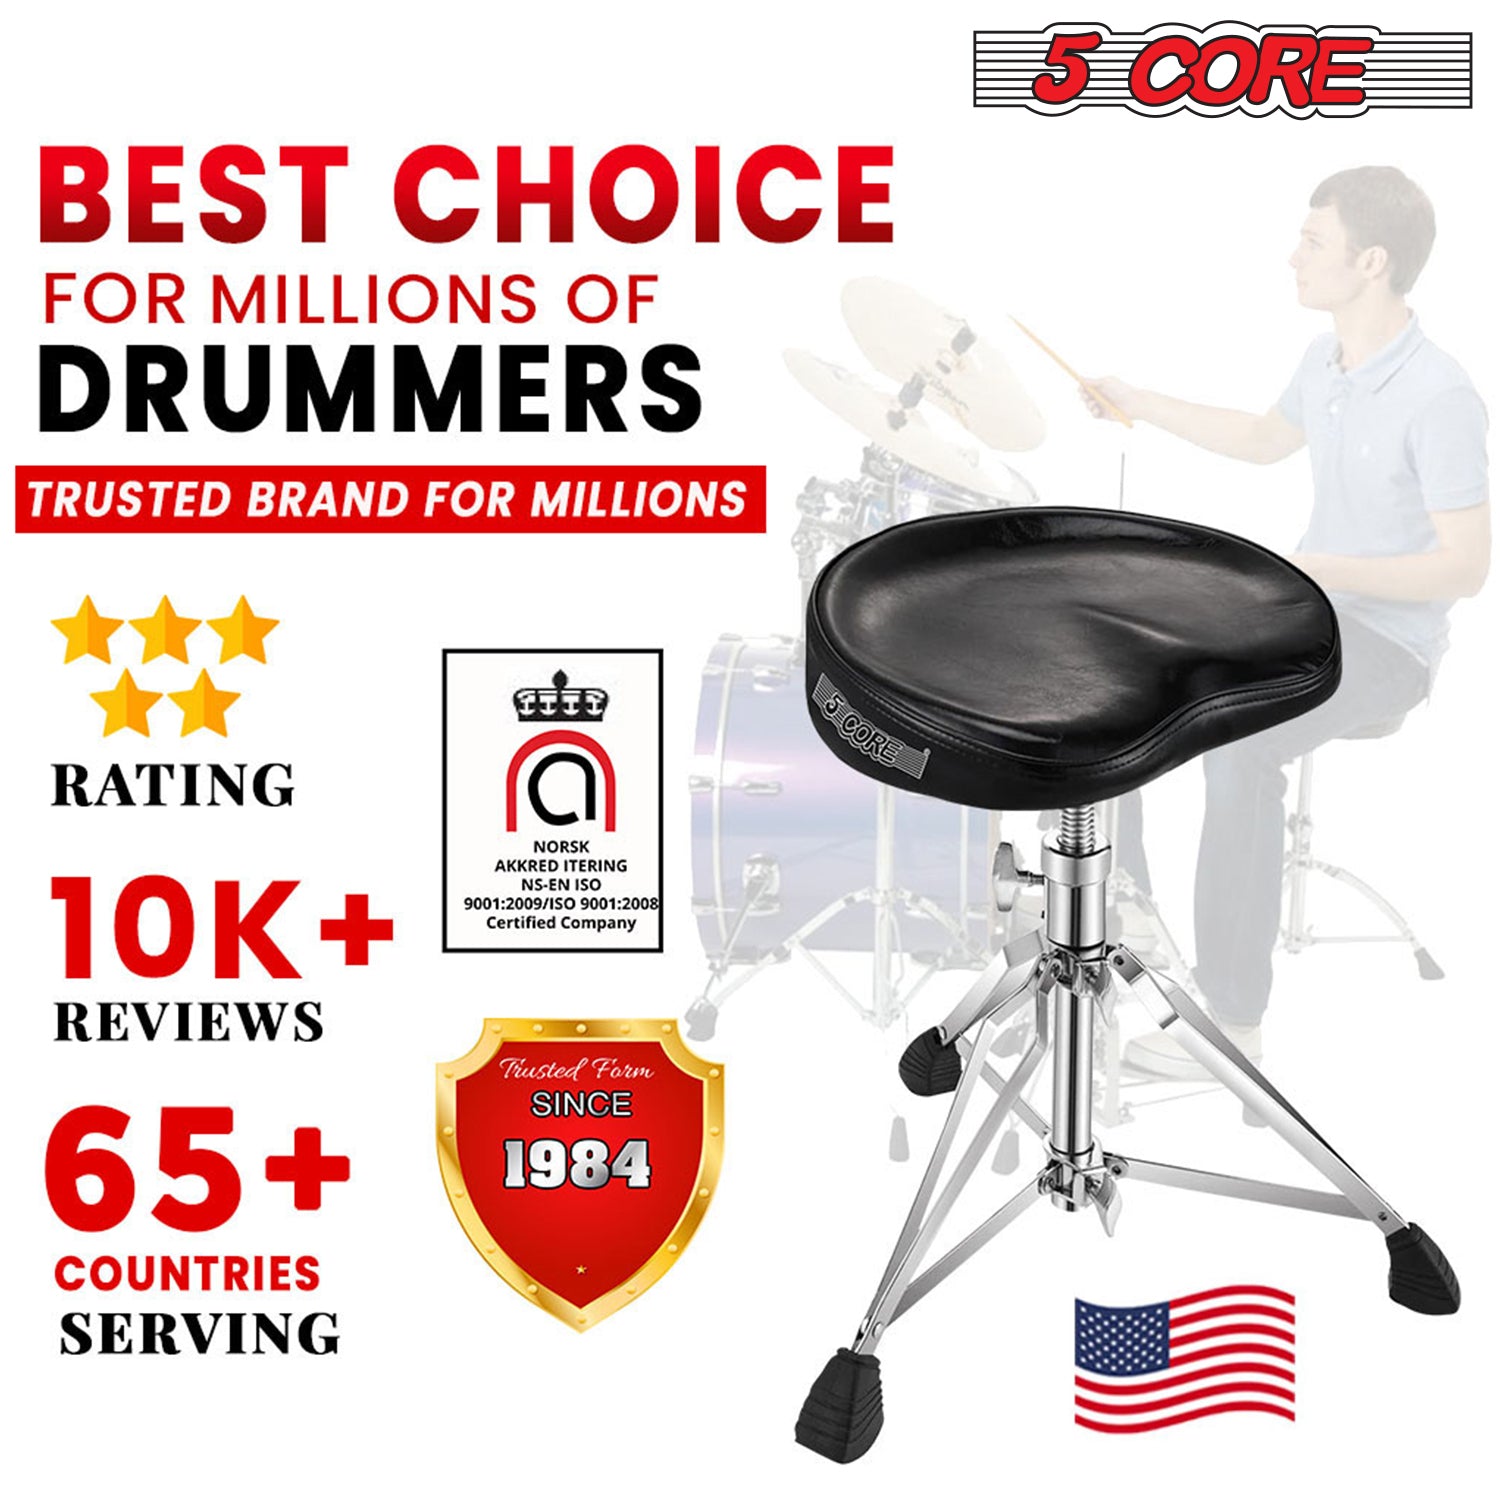 5 Core Musician's Throne: Ergonomic design with padded seat and adjustable height for all musicians.